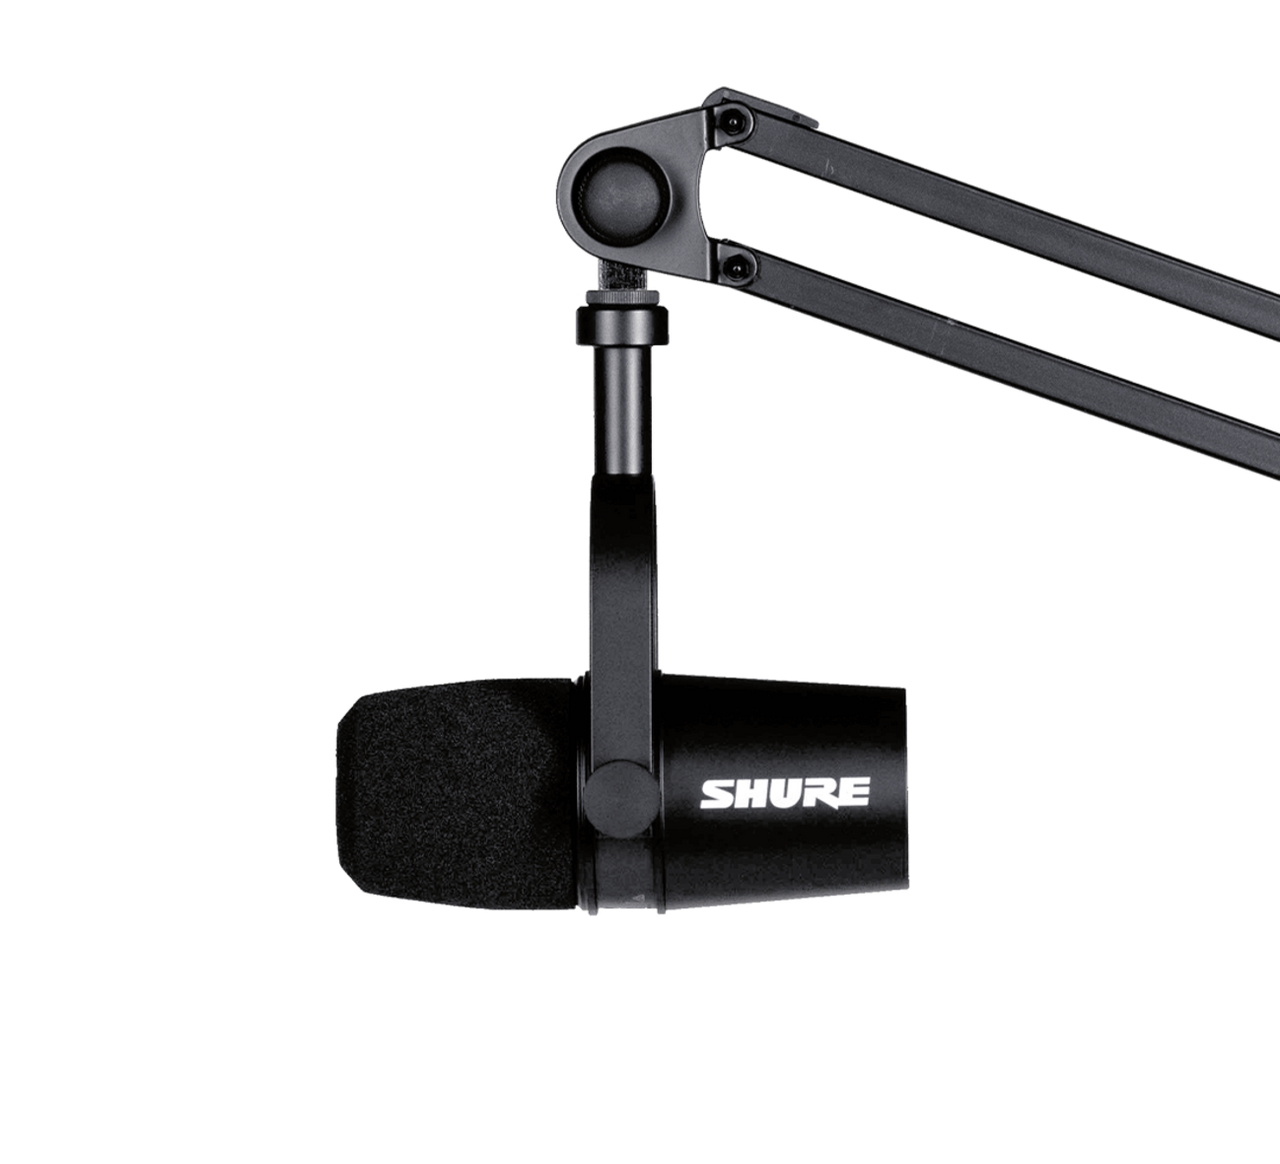 Shure Bundle, Compass Microphone Boom Arm w/ MV7-S Dynamic Microphone  (Silver) and Cable